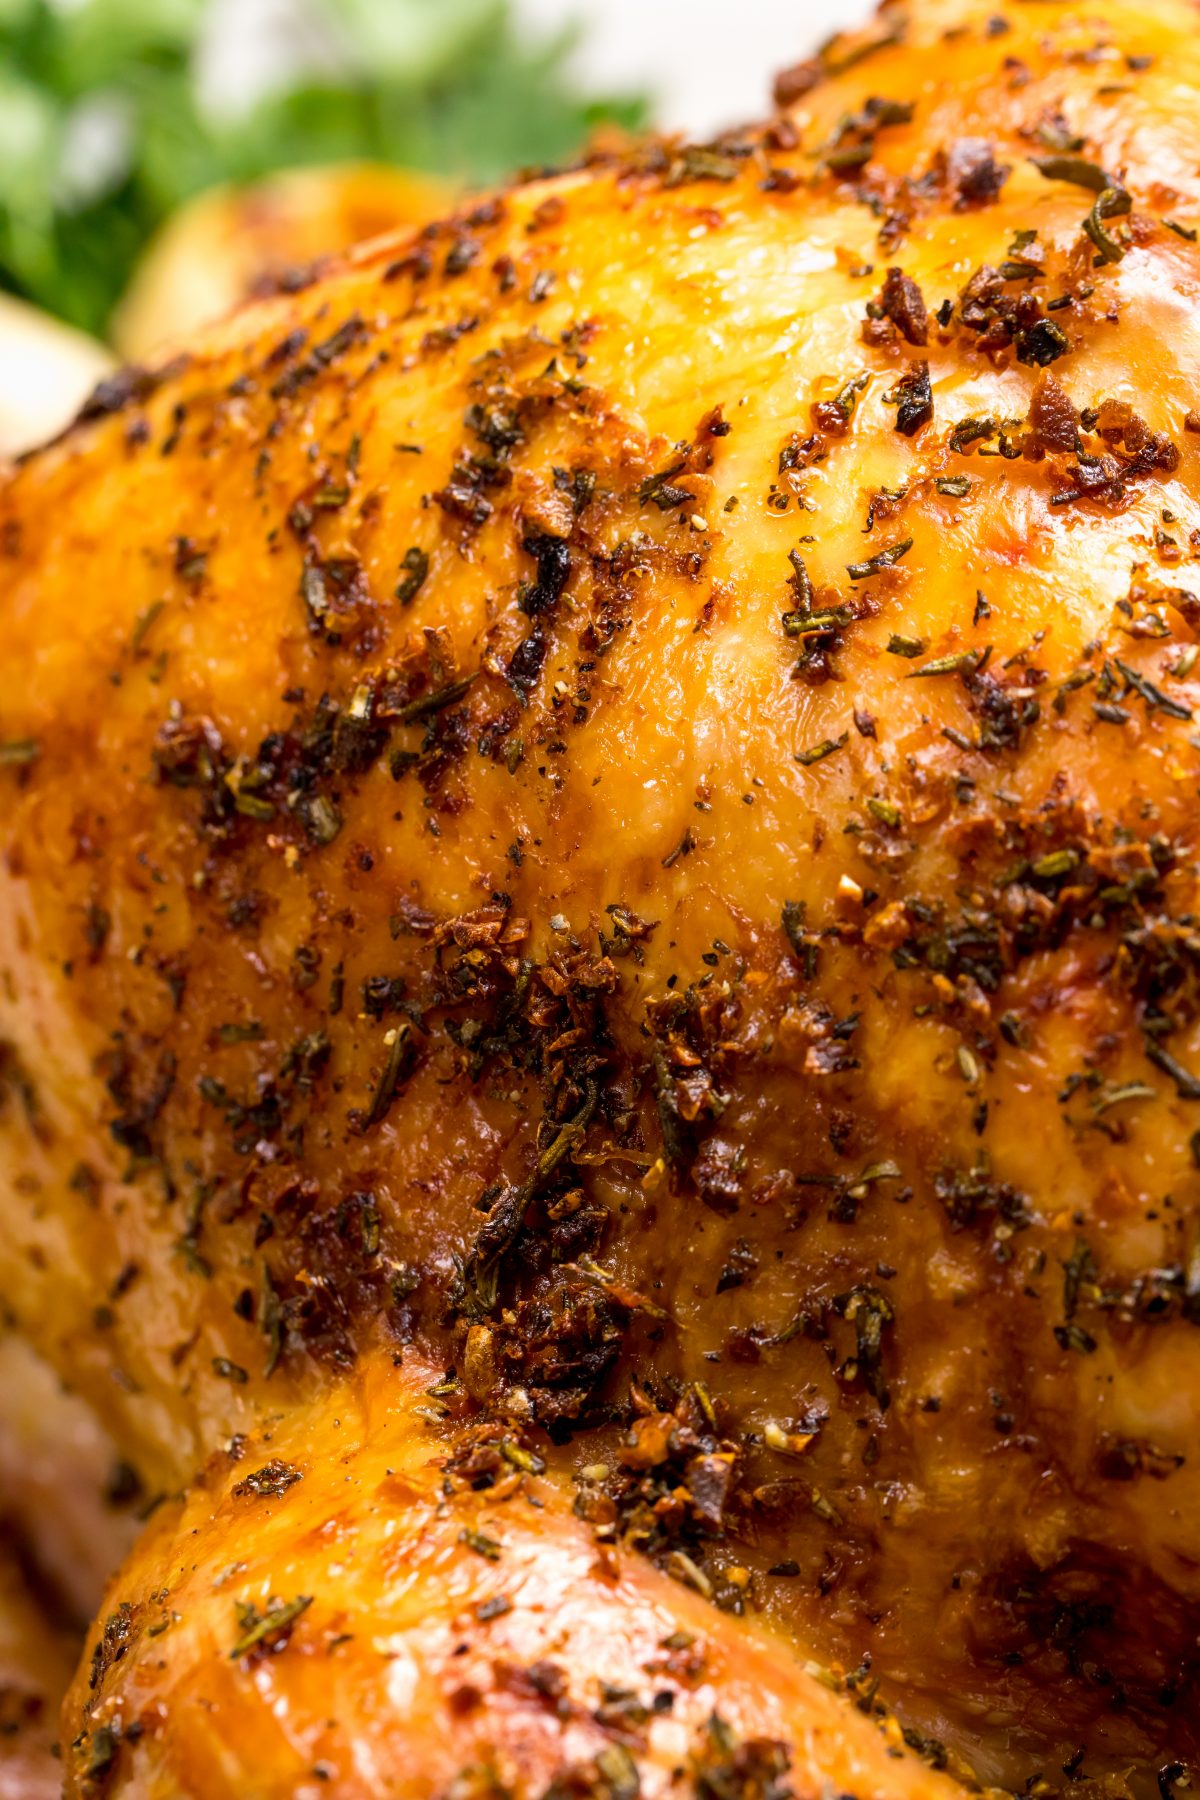 5D4B8488 - Rosemary lemon roasted turkey - The perfect centerpiece for your holiday dinner